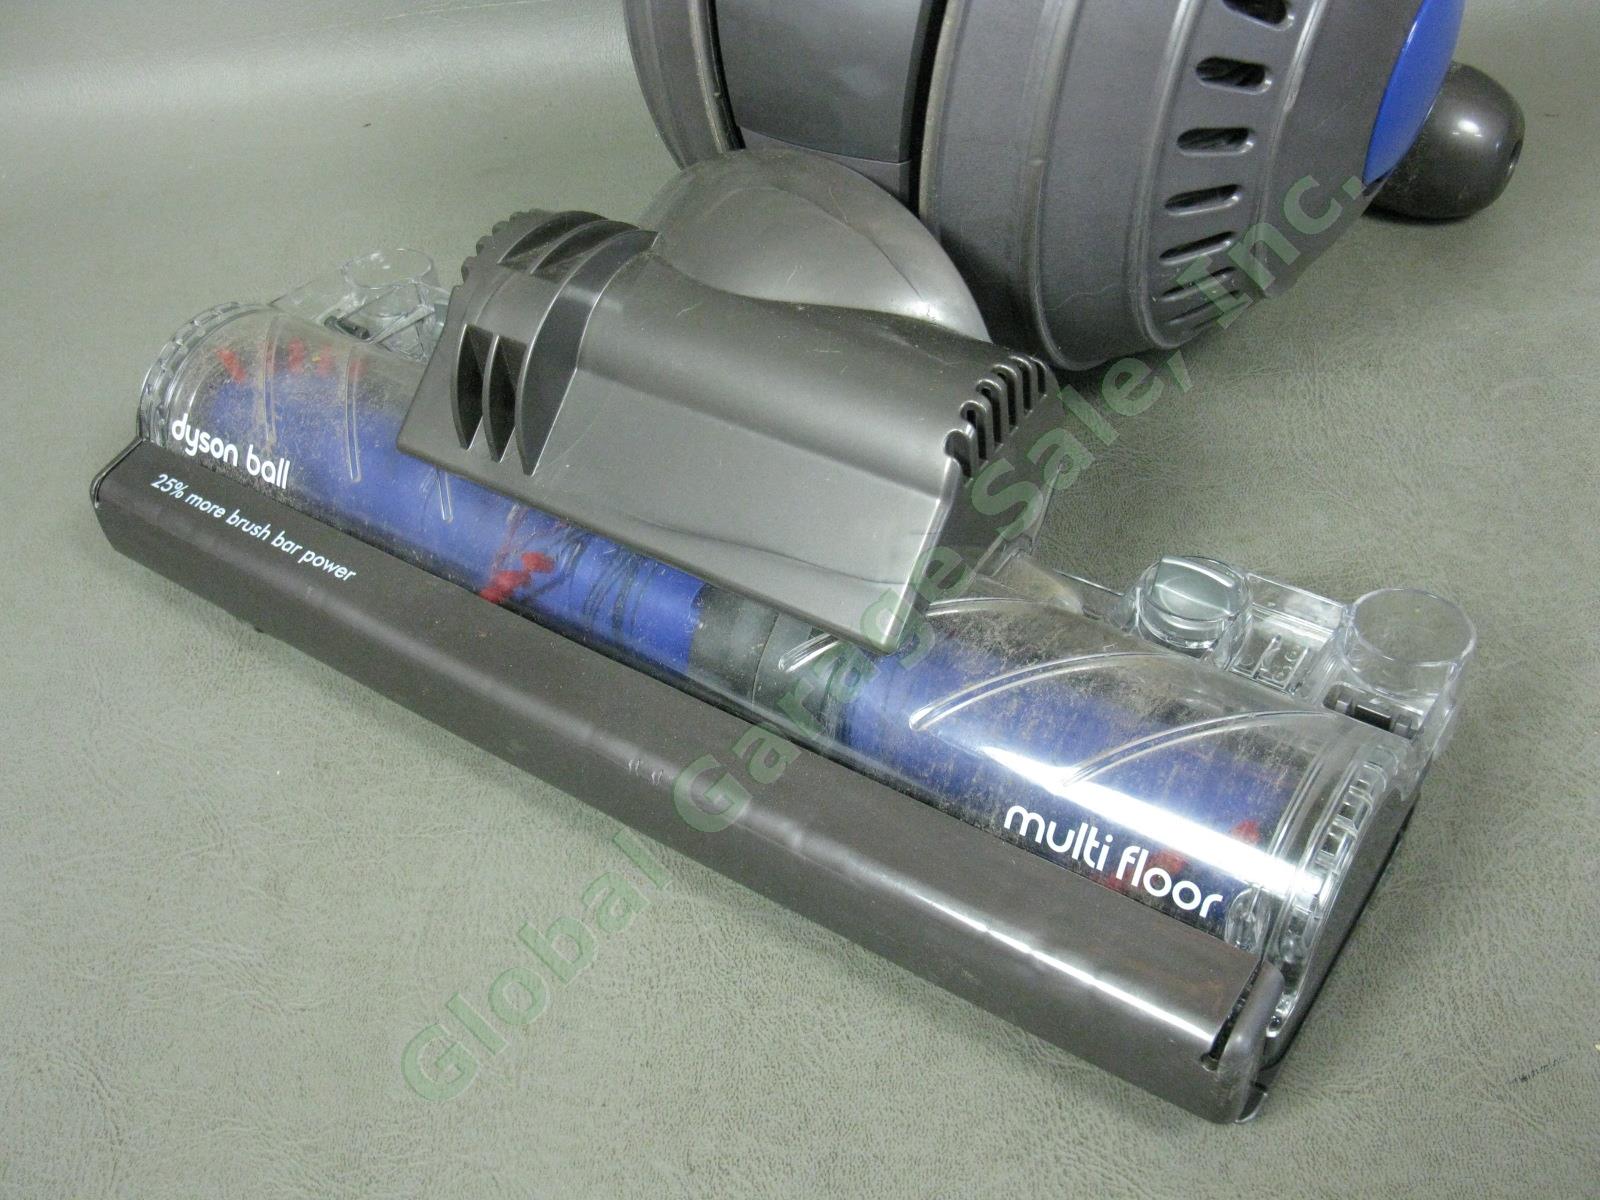 Dyson UP13 Multi Floor Ball Bagless Upright Vacuum Cleaner W/ Manual $400 Retail 3